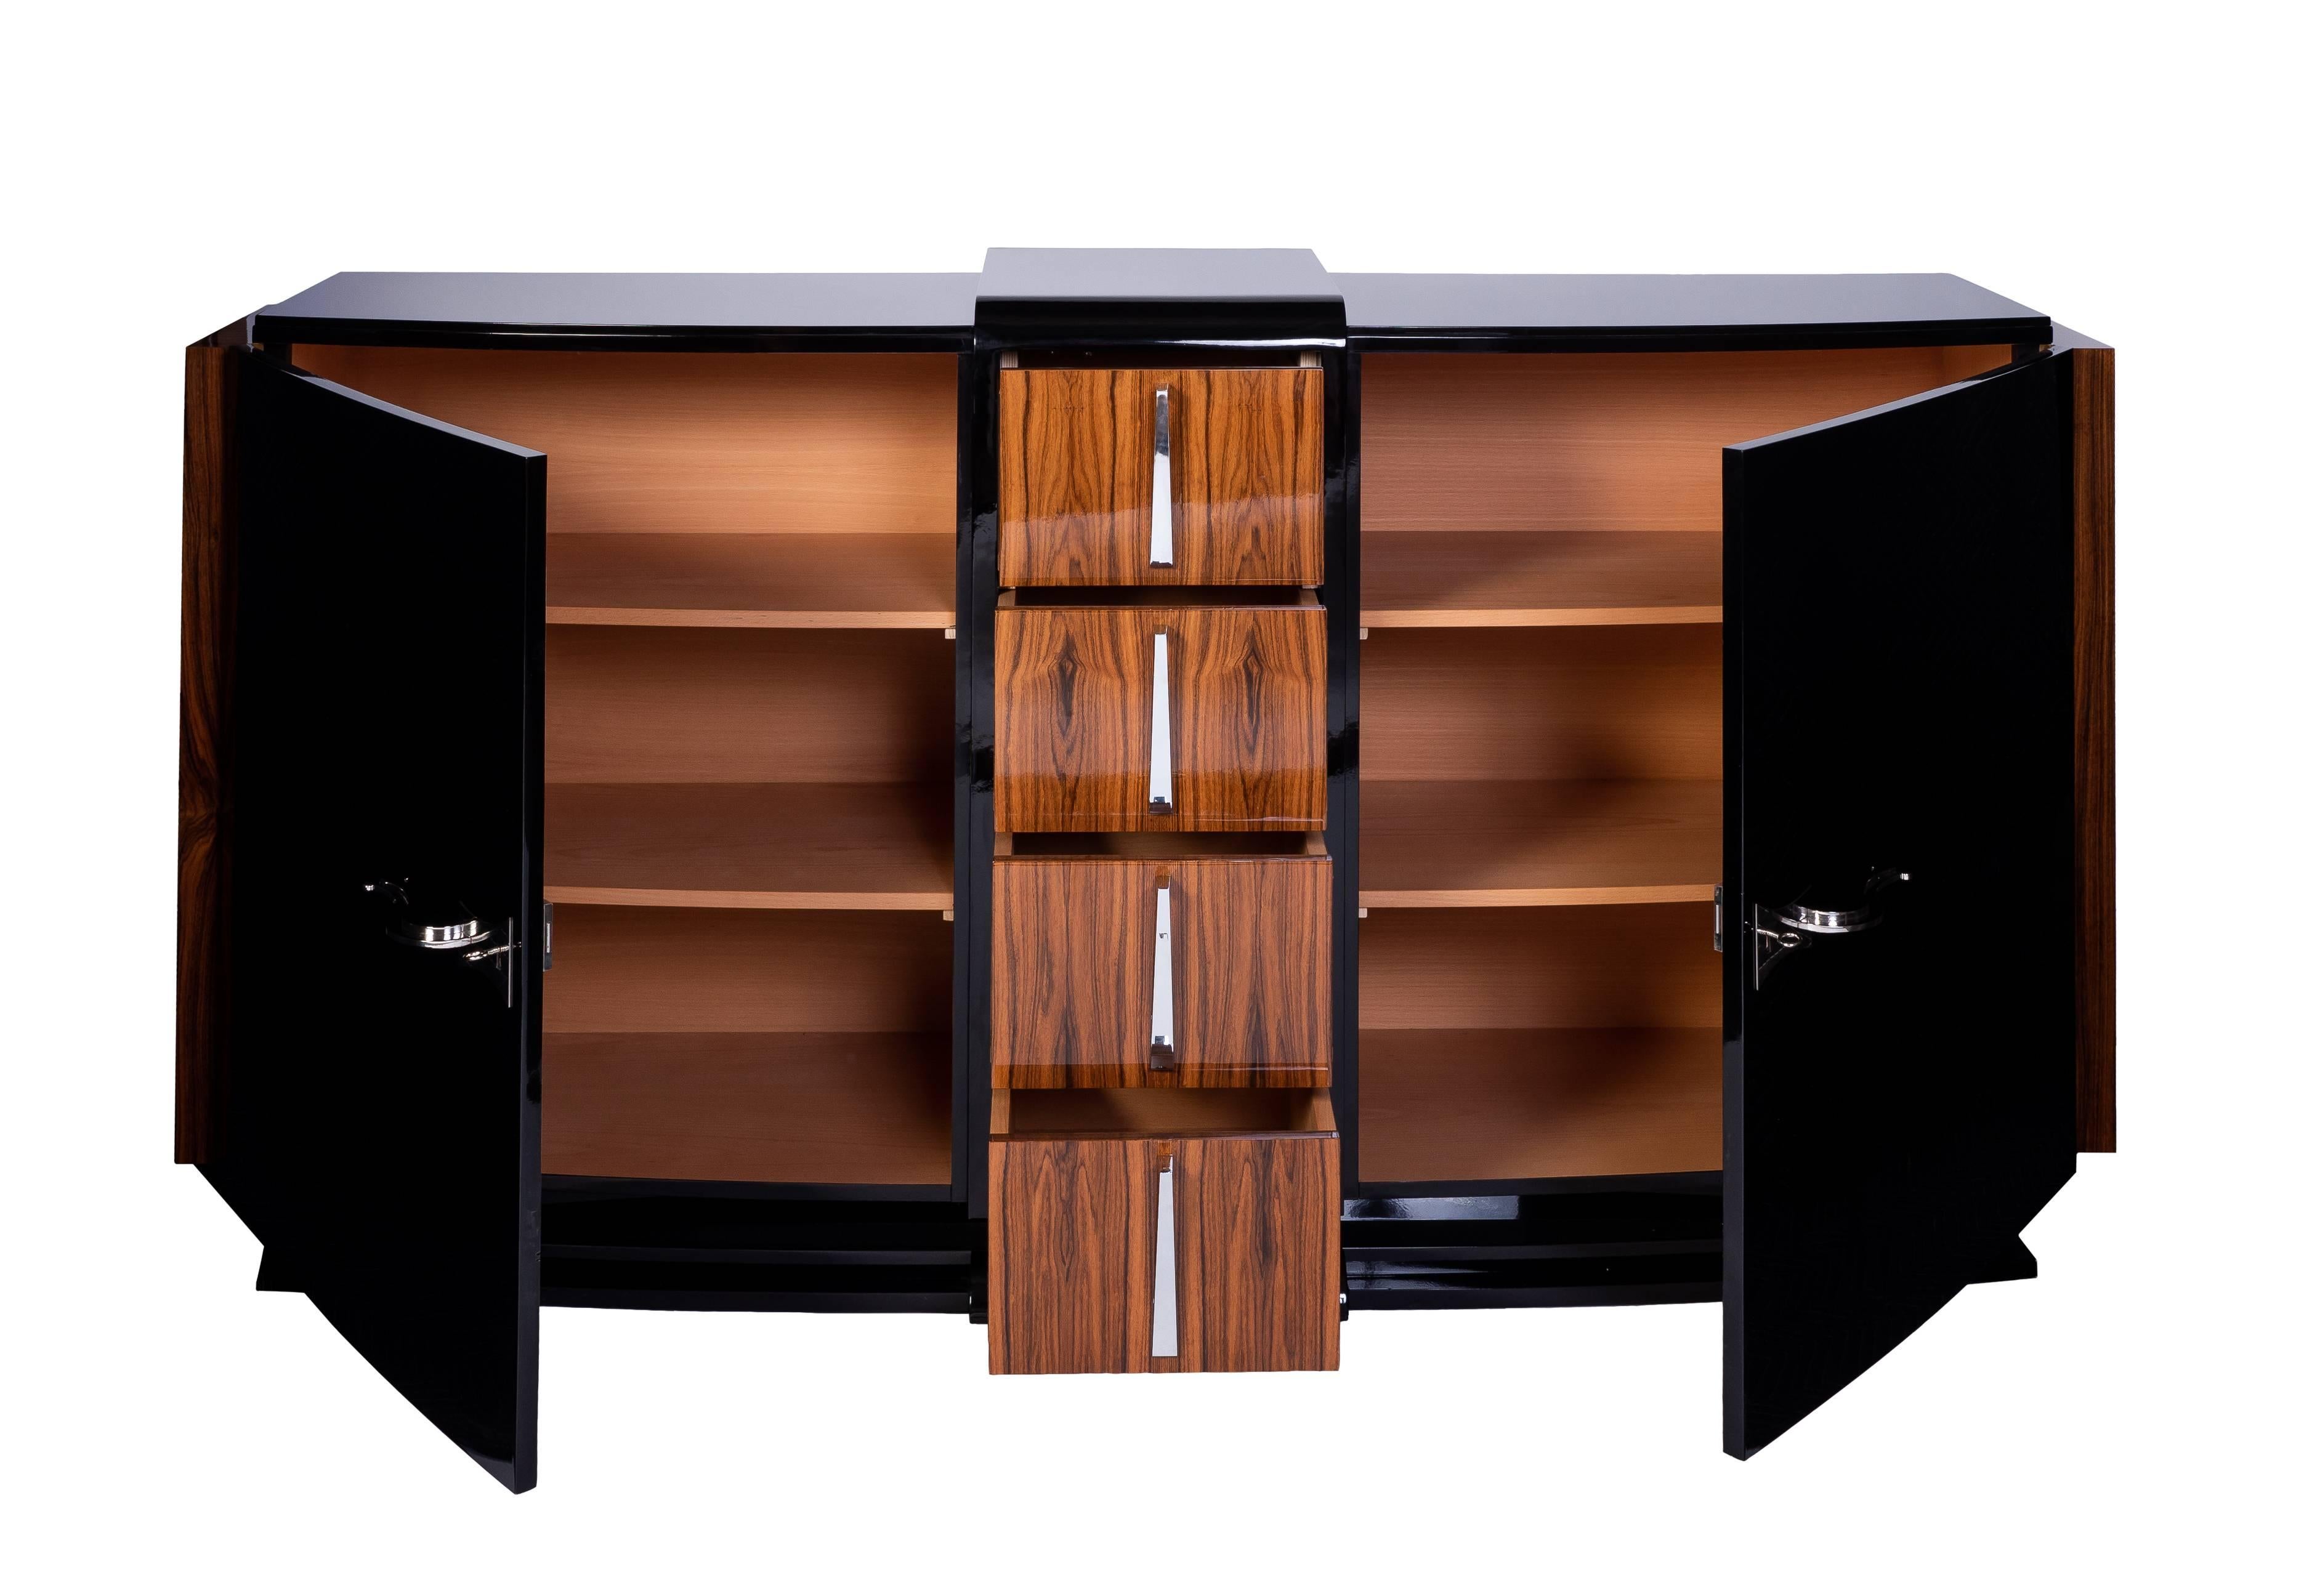 This exceptional Art Deco sideboard features a curved front with burled palisander detailing, two swing doors, four drawers and chrome platted fixtures. The pieces has been finished in a high gloss black lacquer.